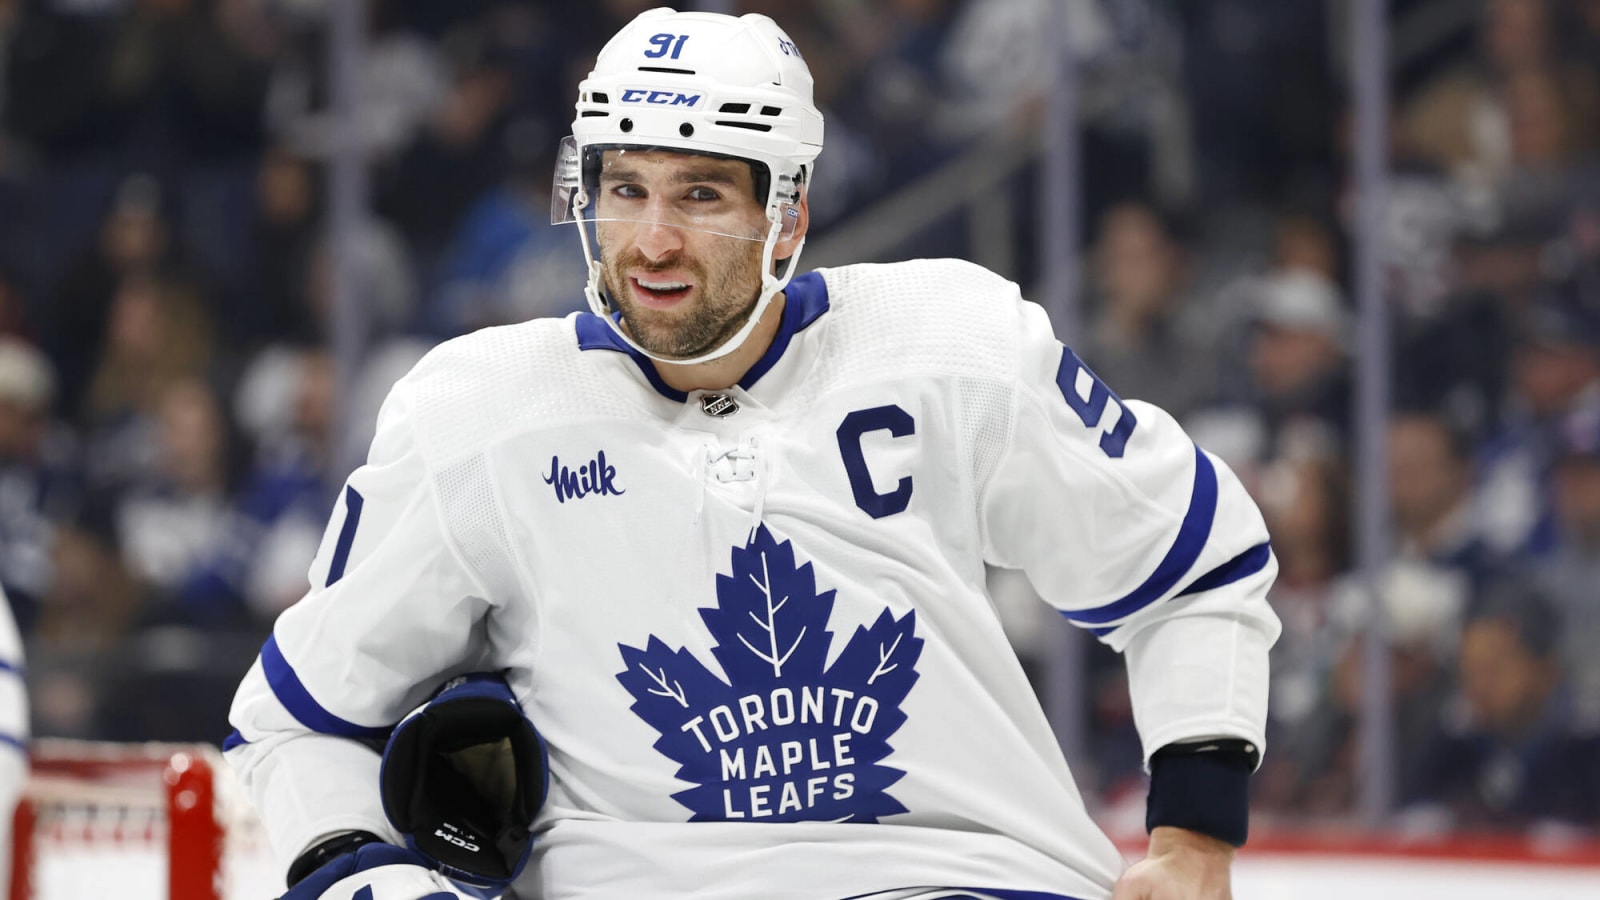 Maple Leafs' Tavares helped off ice with apparent injury